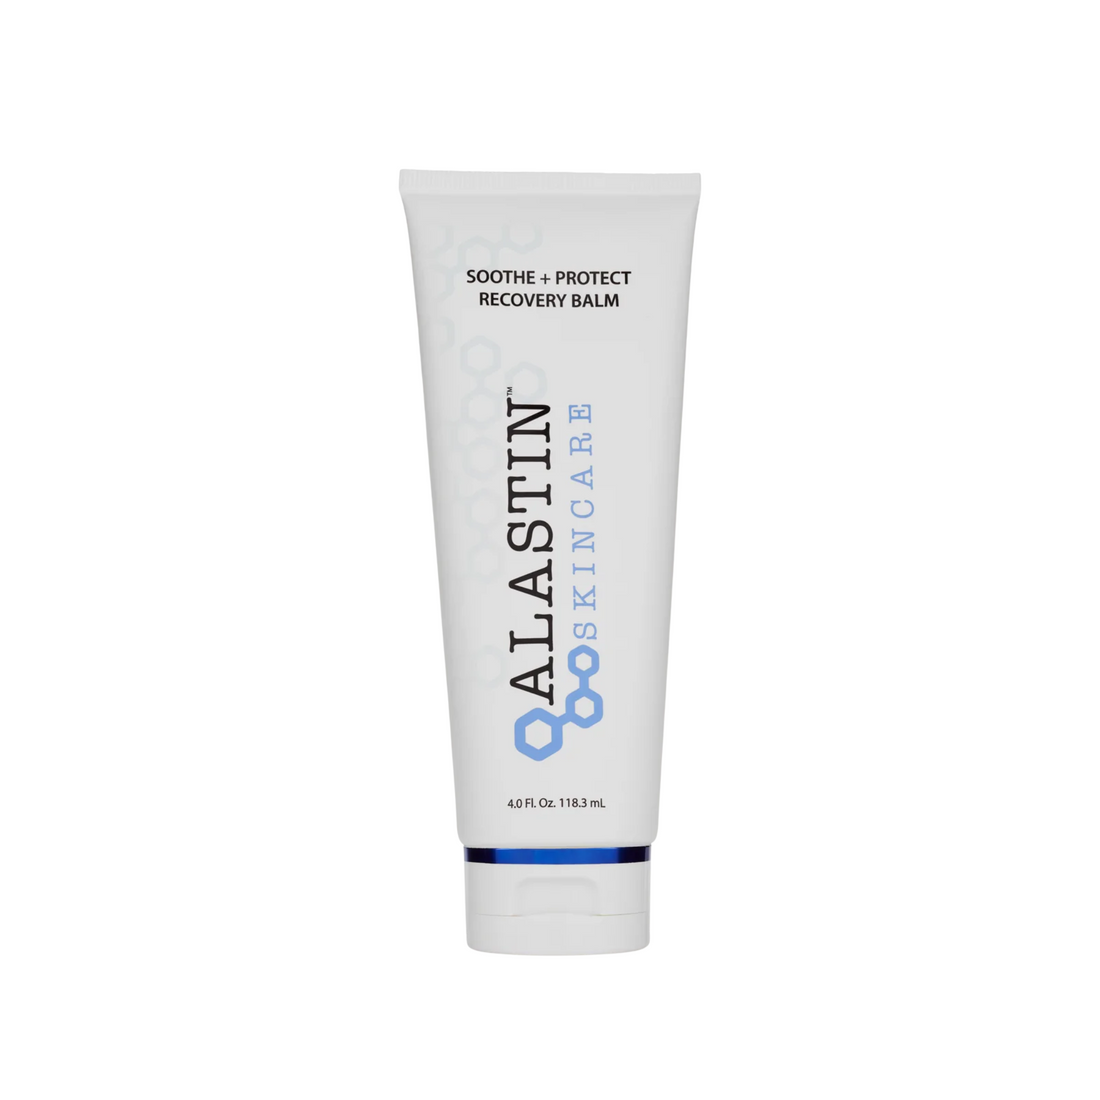 Soothe & Protect Recovery Balm